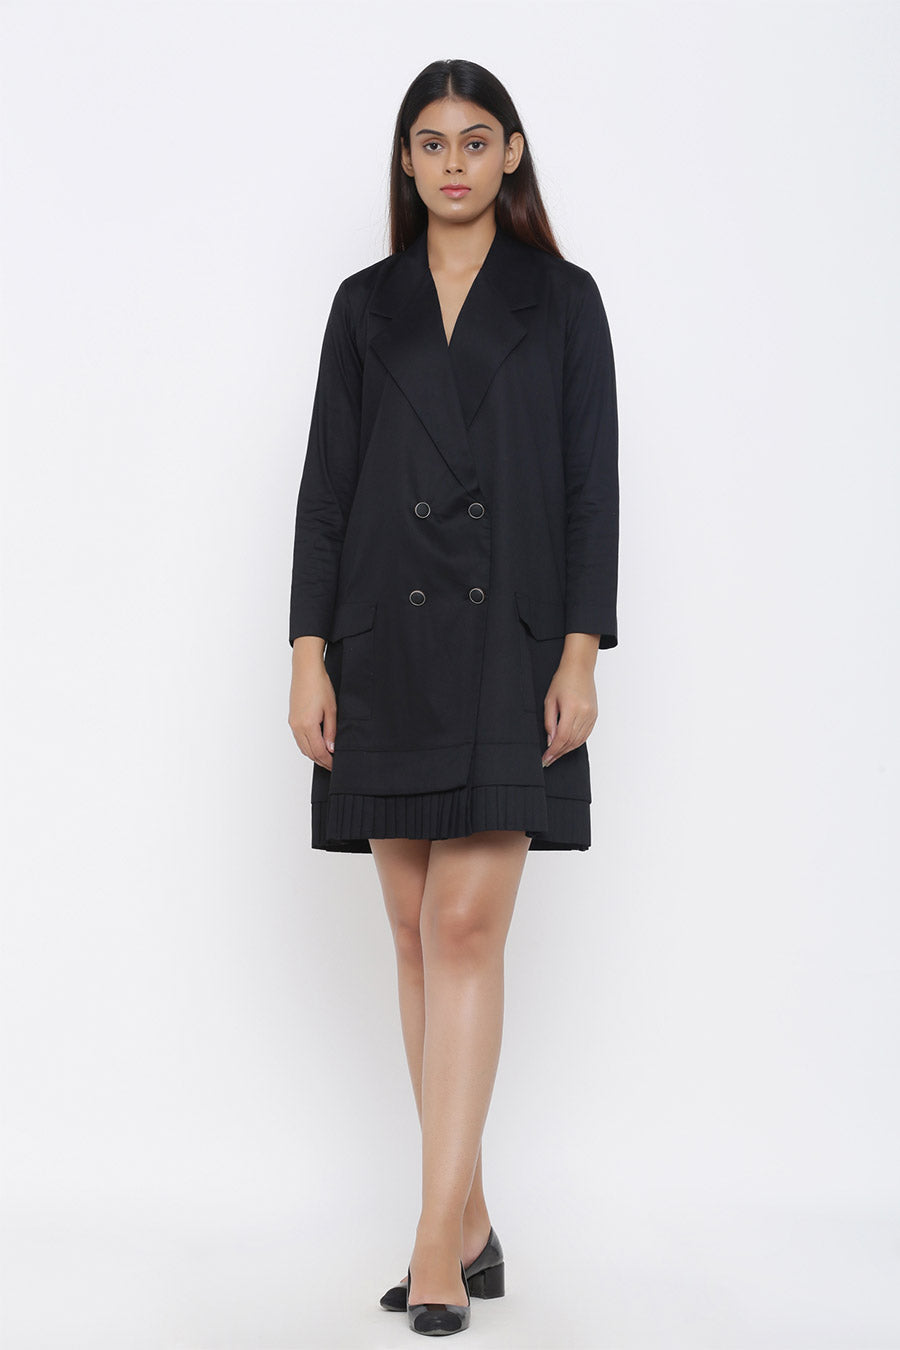 Black Pleated Trench Jacket Dress